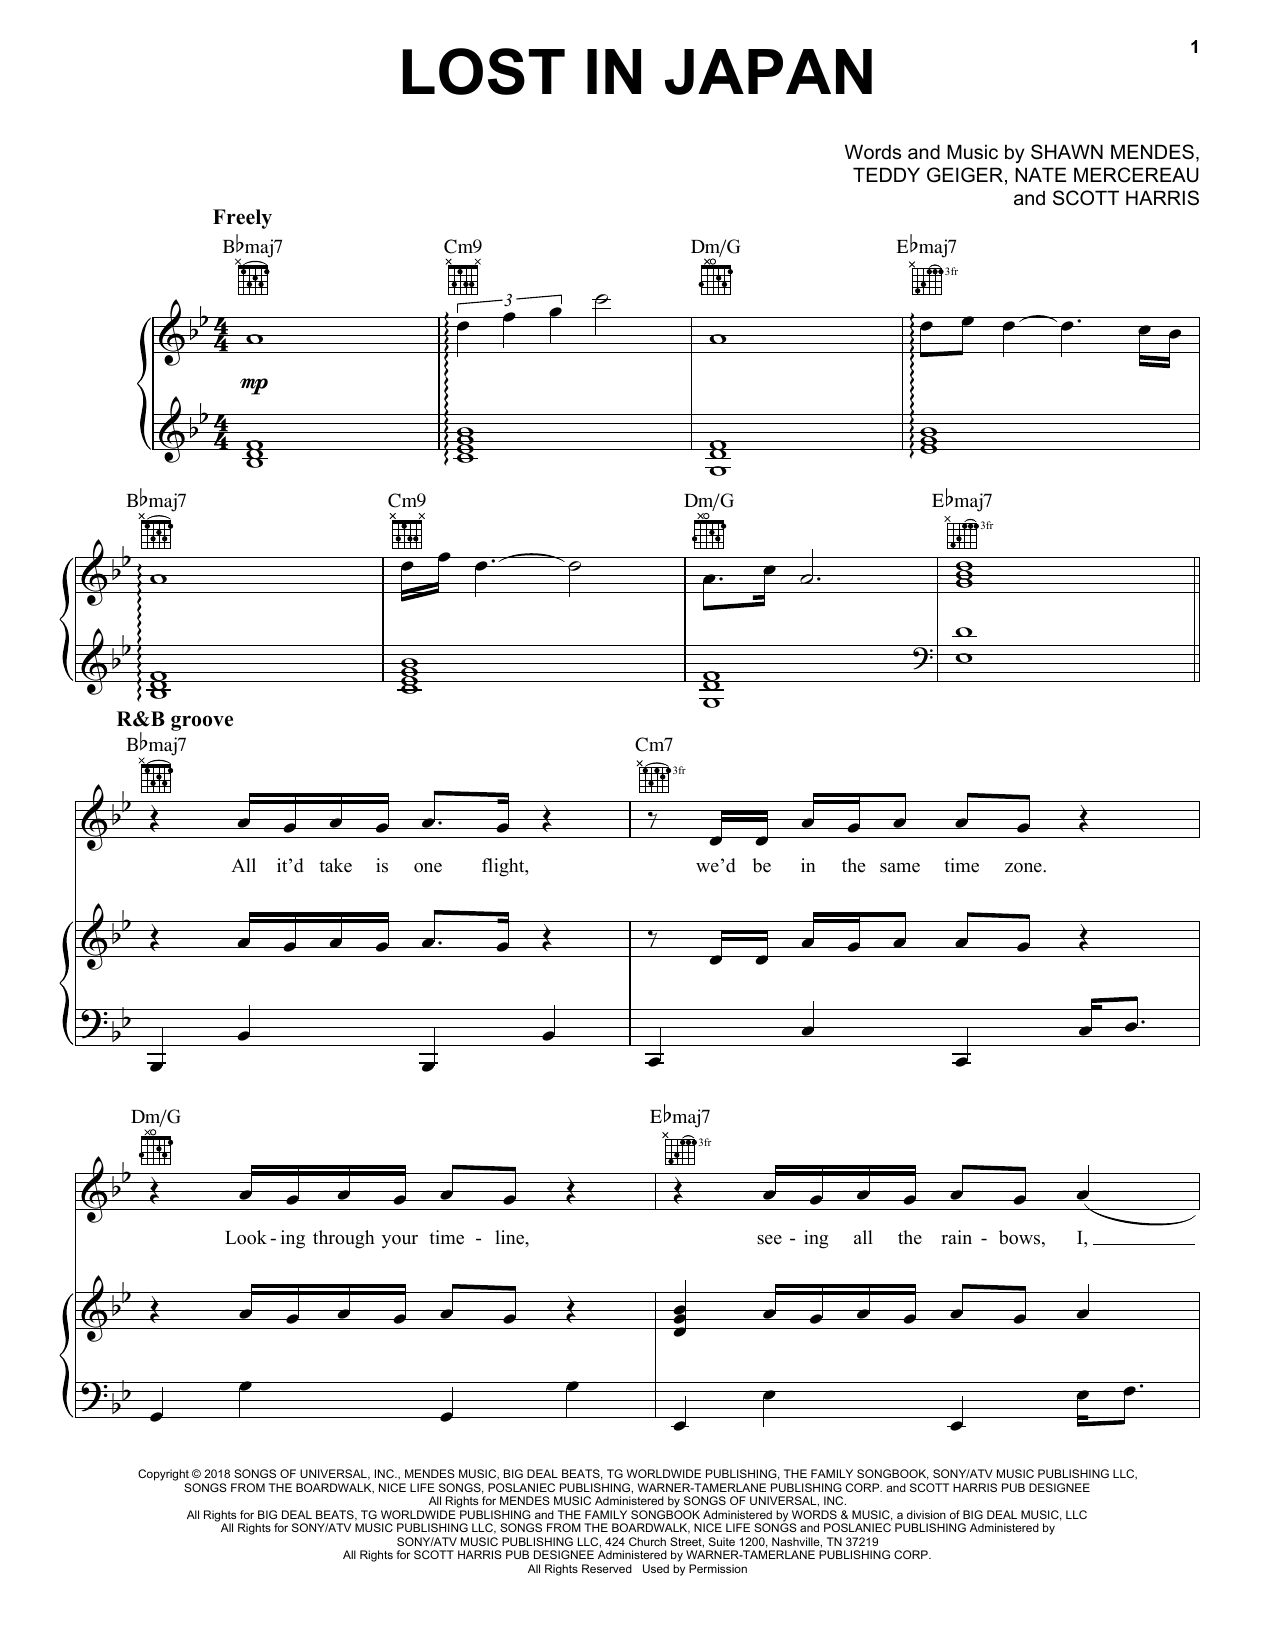 Download Shawn Mendes Lost In Japan Sheet Music